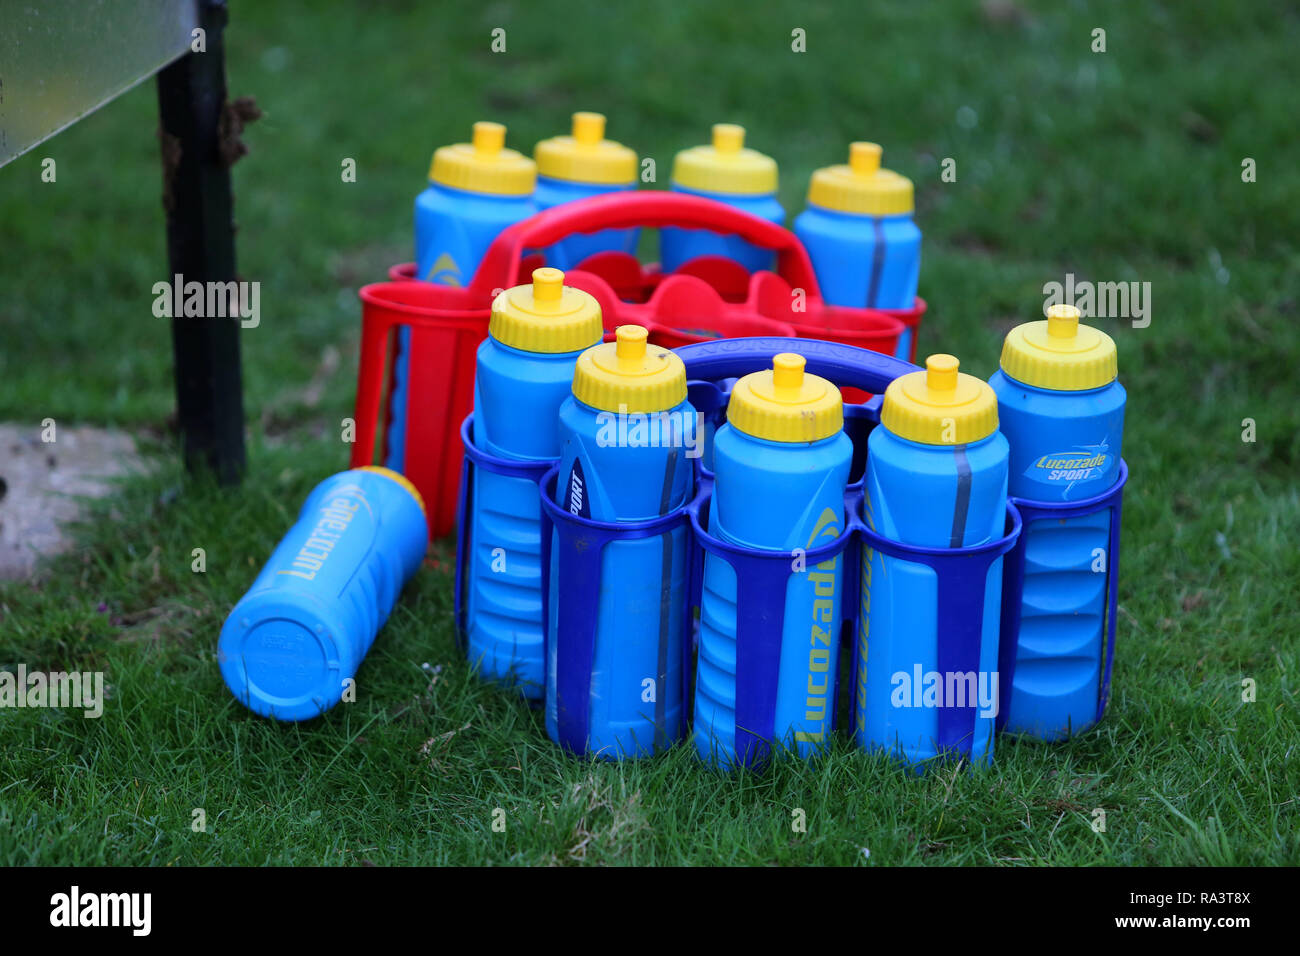 Bottles of Lucozade ready for a half time break during a match, Chichester, West Sussex, UK. Stock Photo